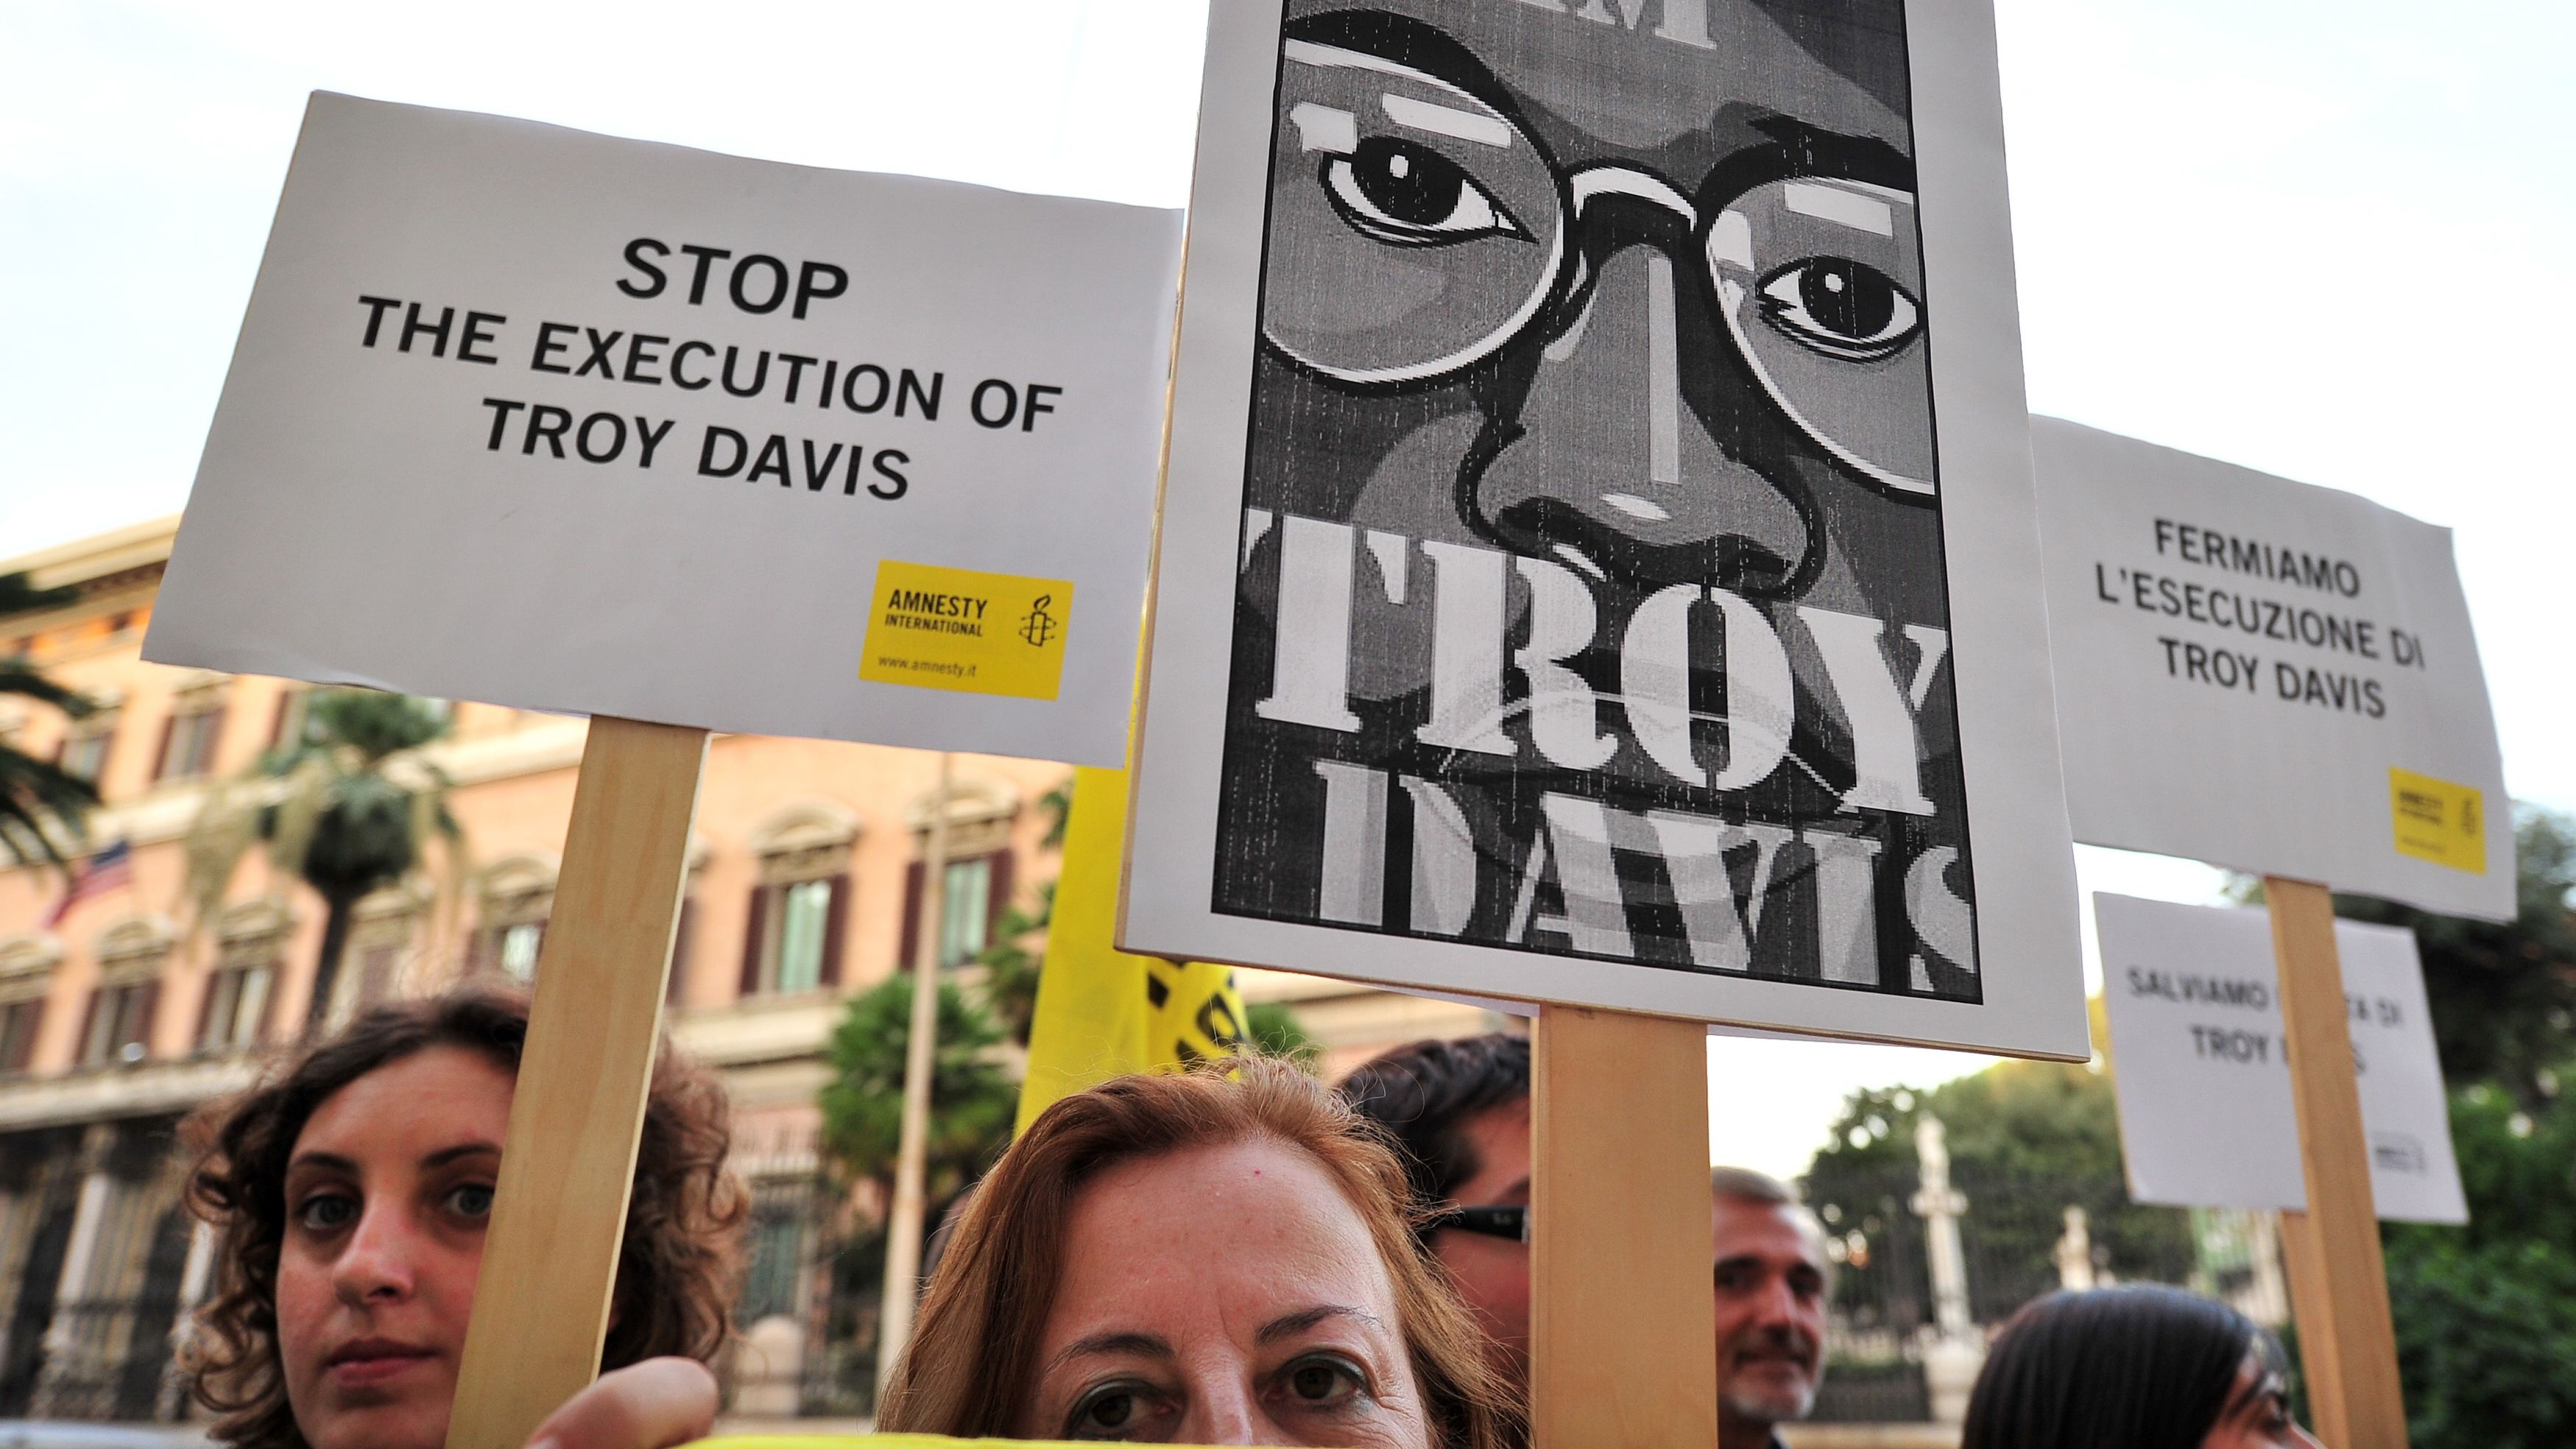 Amnesty International activists hold banners in support of Troy Davis at the U.S. Embassy in Rome on Friday.